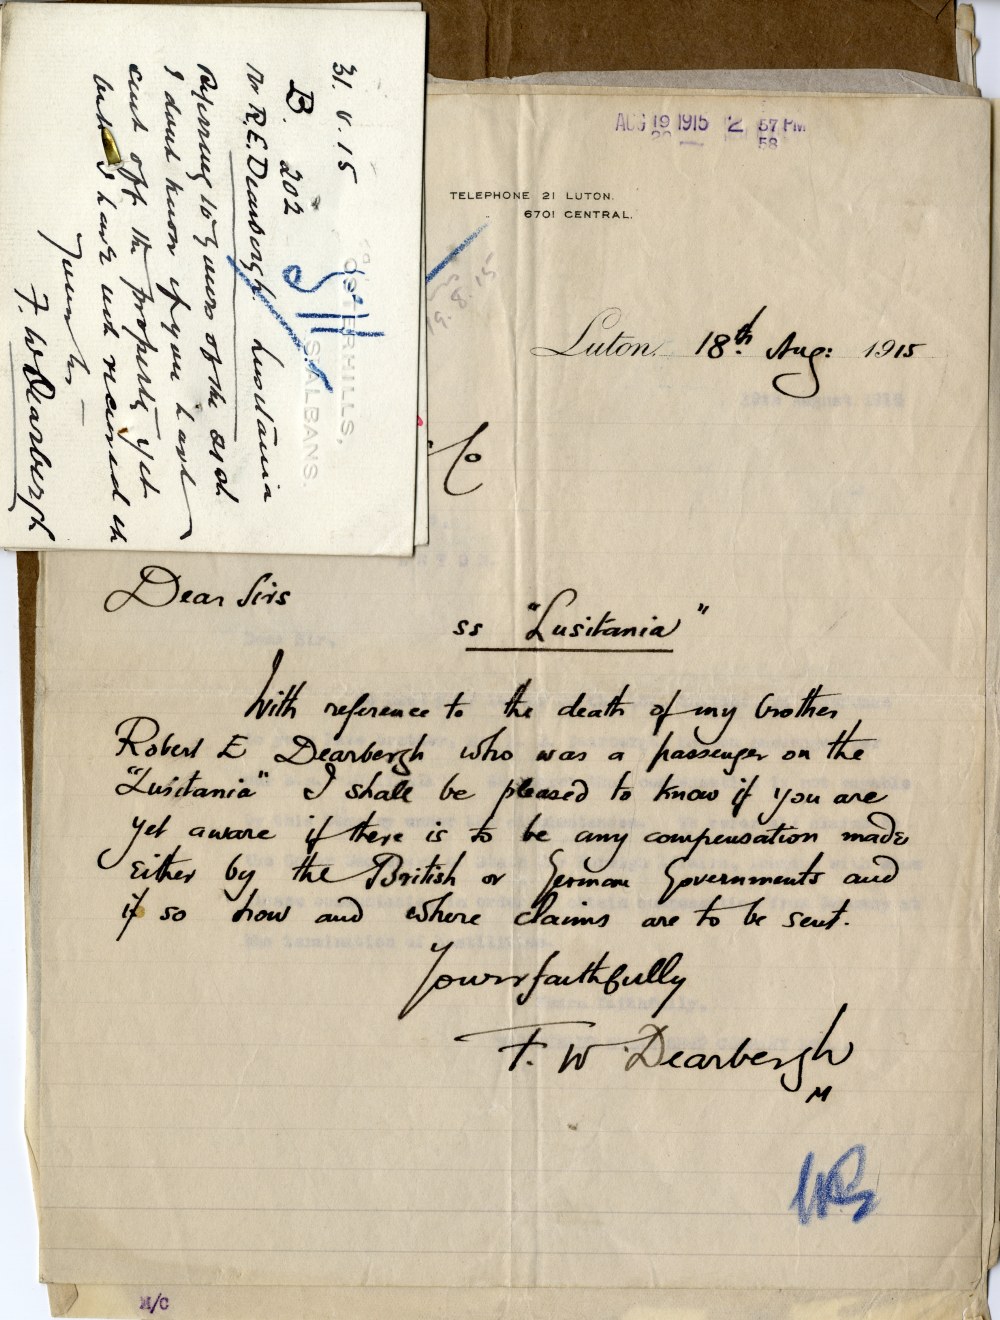 CUNARD: Rare archive of correspondence relating to the loss of Mr R. E. Dearbergh, a saloon